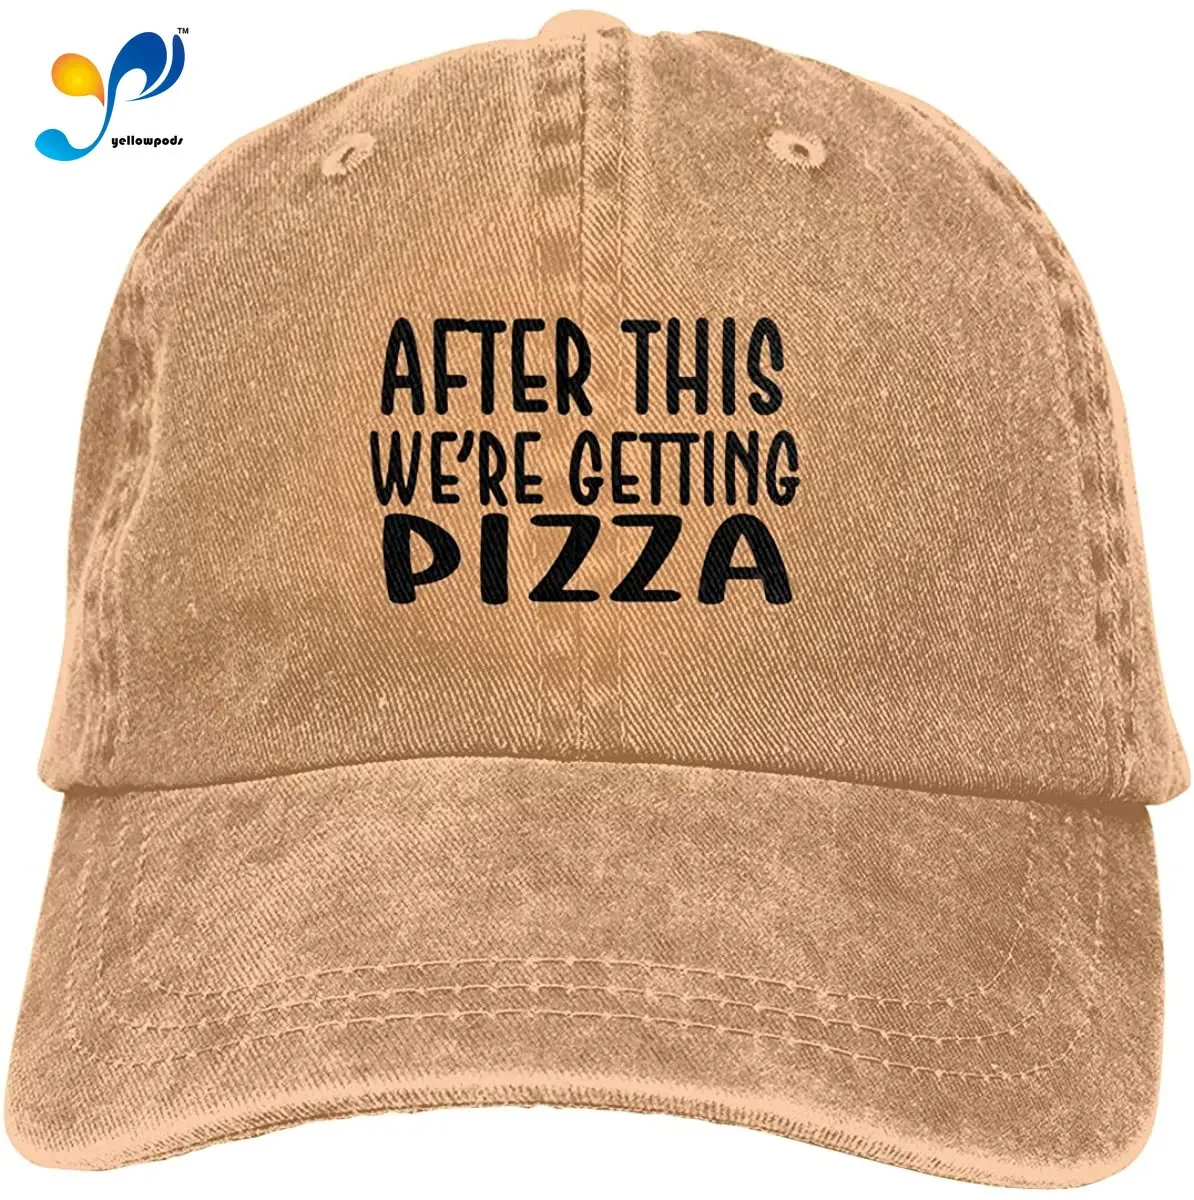 

After This We're Getting Pizza Unisex Soft Casquette Cap Fashion Hat Vintage Adjustable Baseball Caps